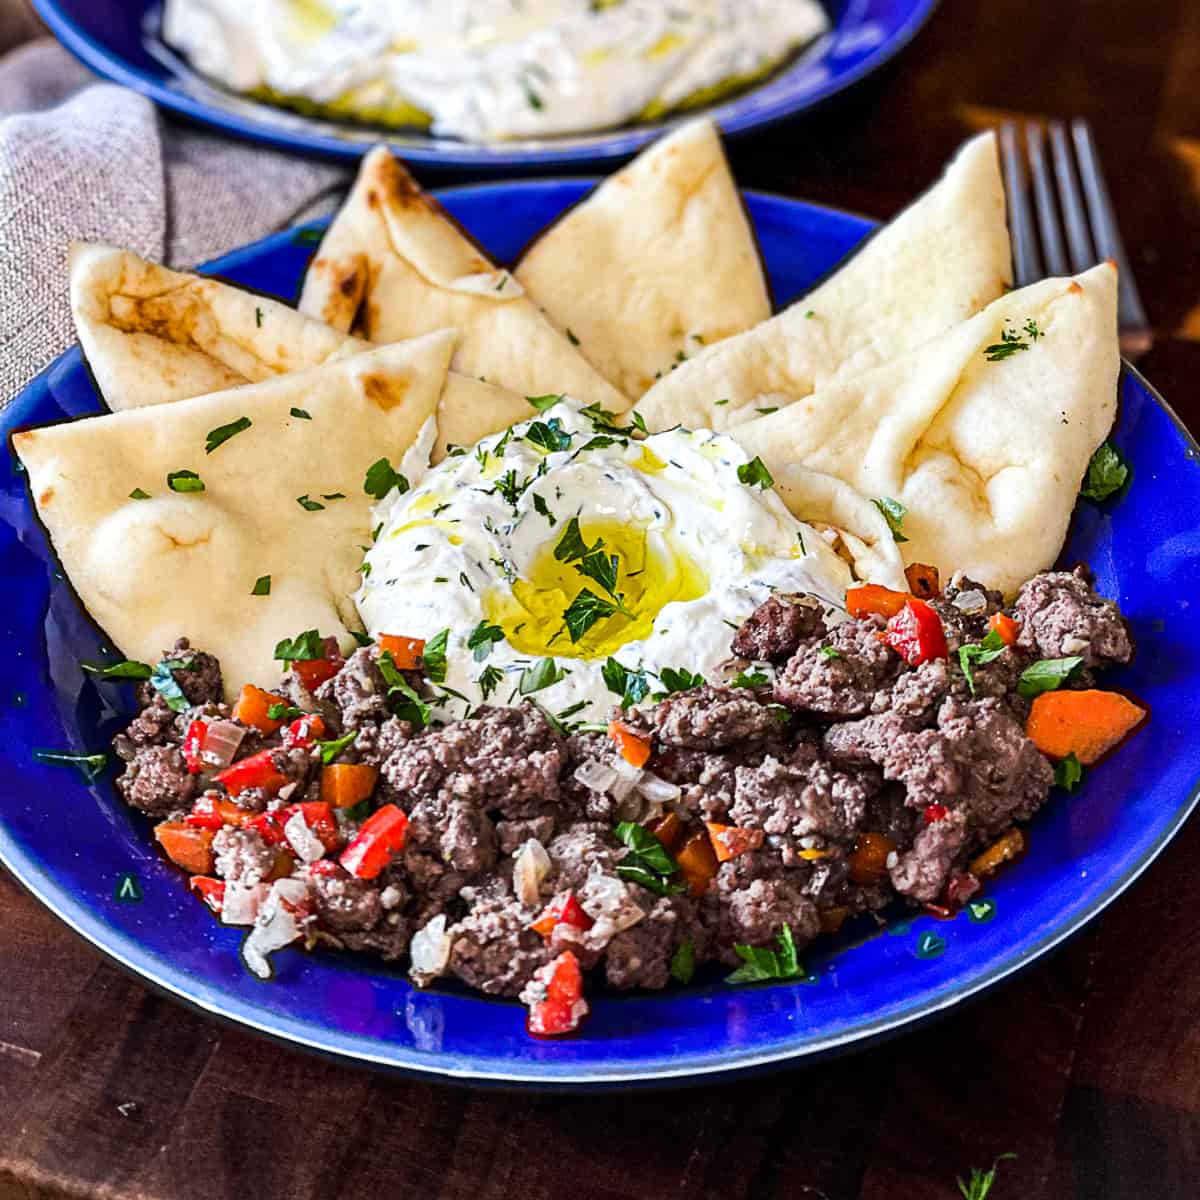 Mediterranean Ground Beef and Yogurt Platter with Seasoned Ground Beef and Peppers, Yogurt Sauce with Oil and Parsley, and Fresh Triangles of Pita on a Plate